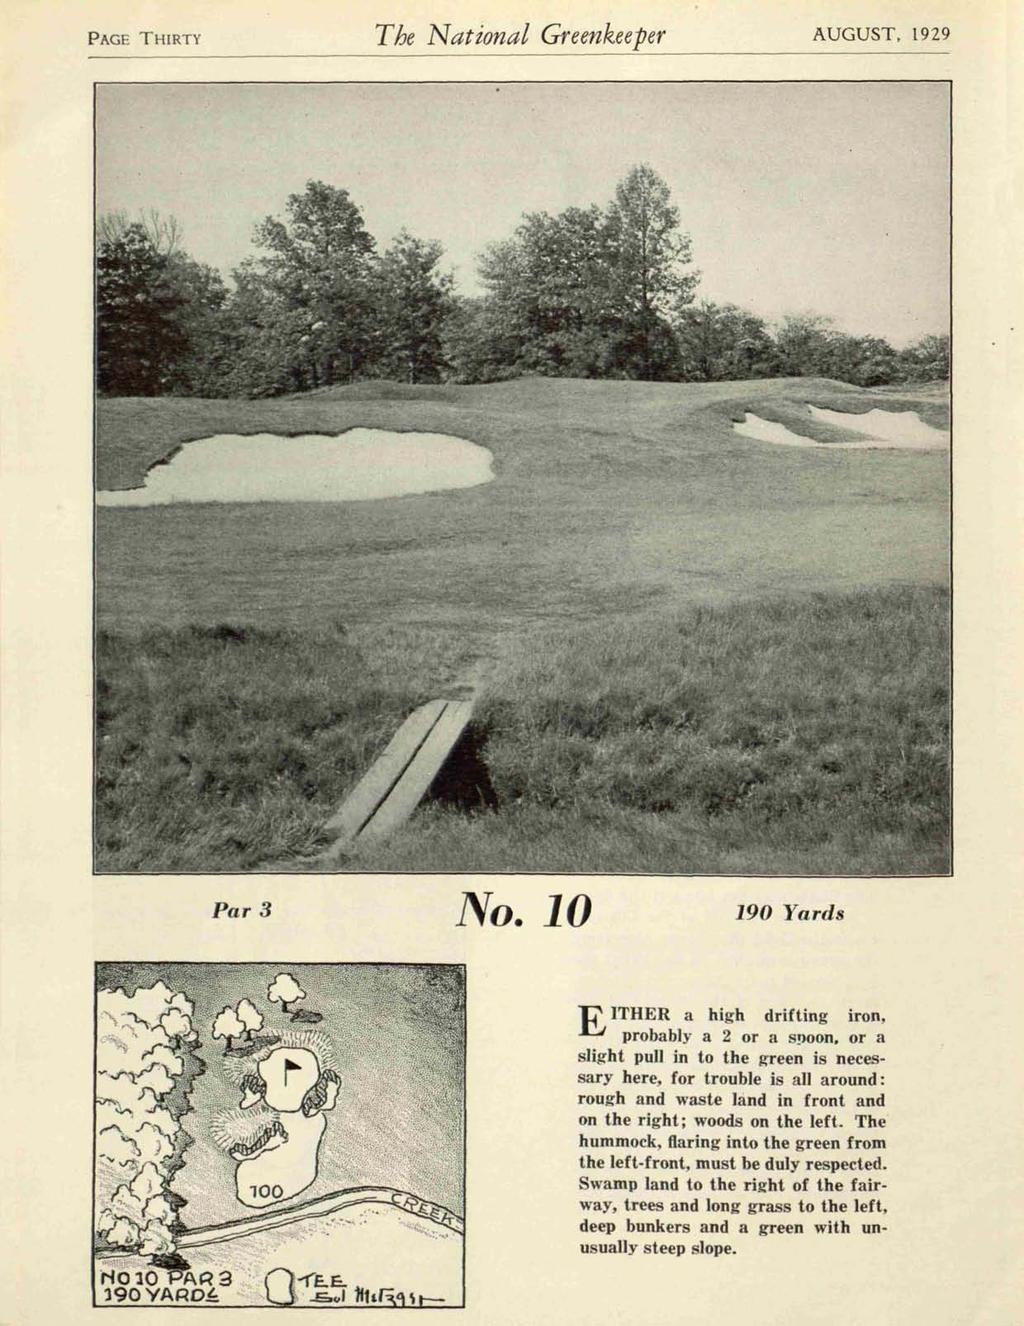 PAGE THIRTY The National Greenkeeper AUGUST, 1929 Par 3 No. 10 190 Yards EITHER a high drifting iron, probably a 2 or a S!loon.